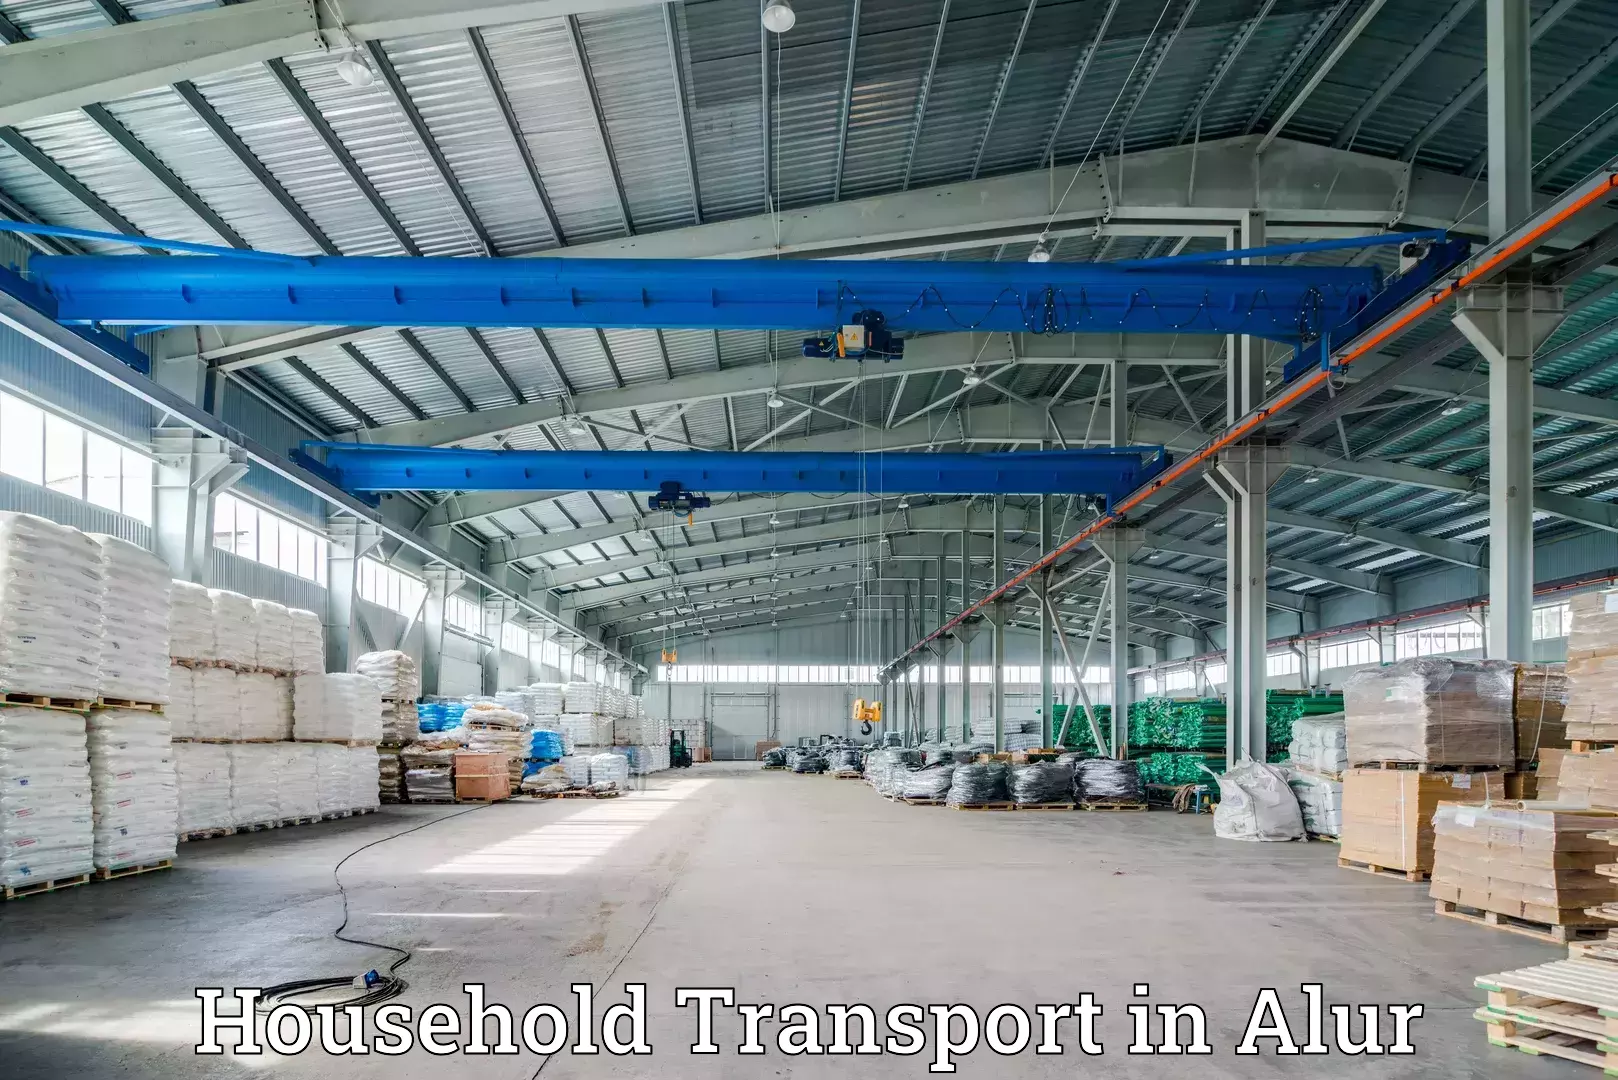 Household transport solutions in Alur